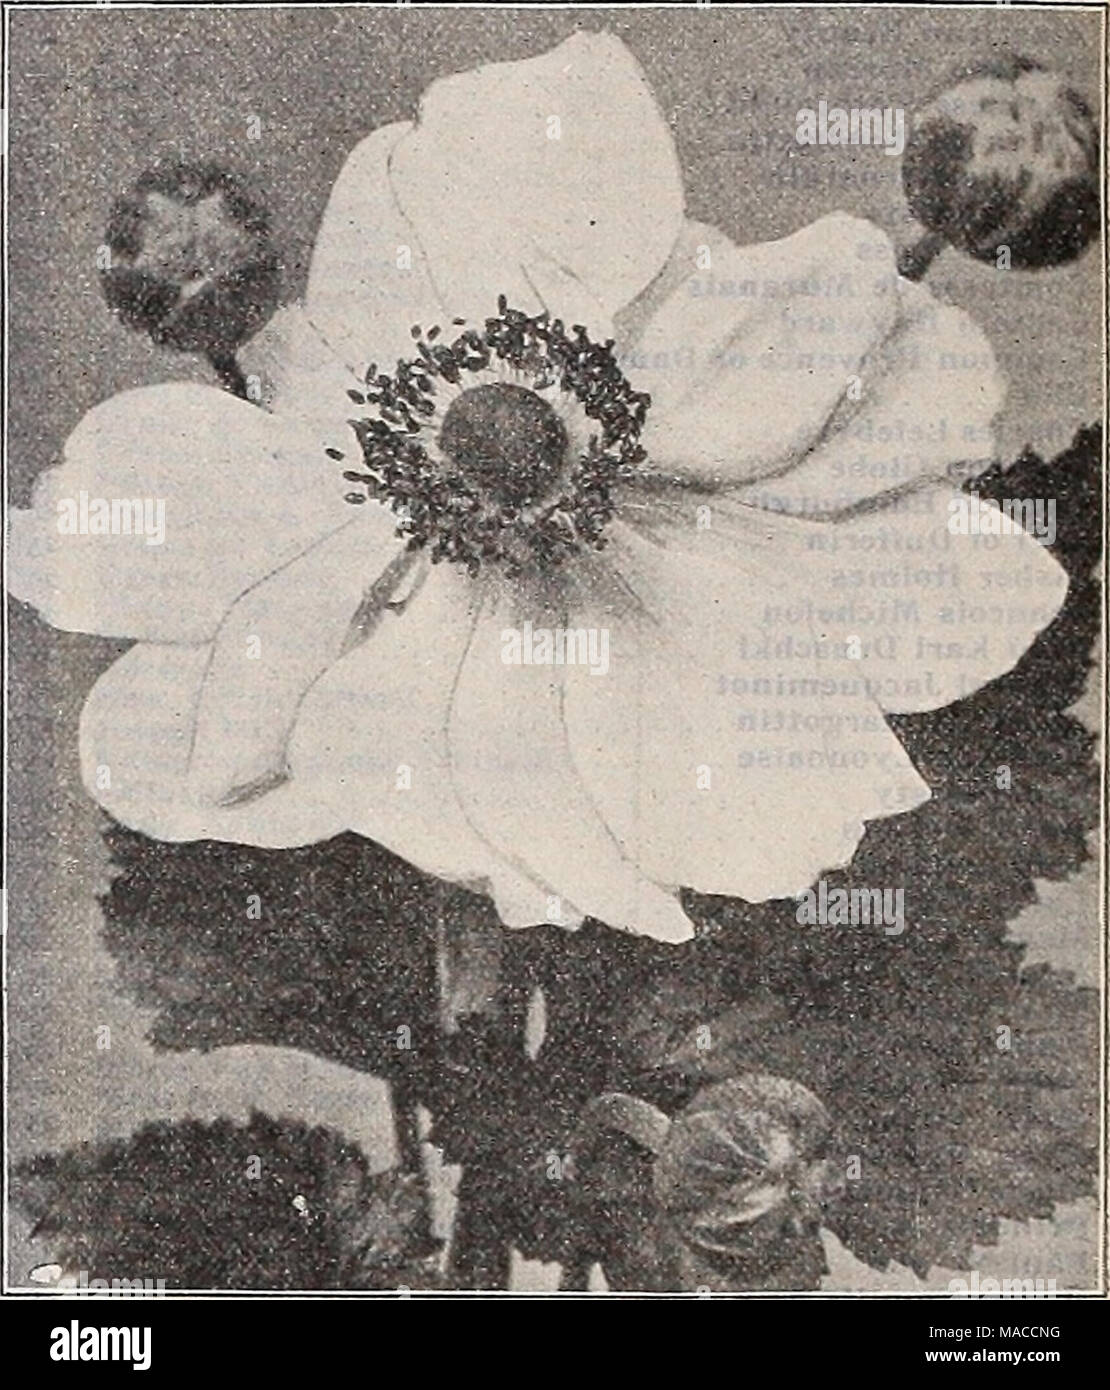 . Dreer's wholesale price list spring edition April 1910 June : seeds plants and bulbs for florists fertilizers, insecticides, tools, sundries, etc . ANEMONE JAPONICA, (JAPANESE WINDFLOWER) Agrostemma. (Campion.) Coronaria. 3^2-inch pots $0 85 Flos Jovis. 3!^-inch pots 85 Walker!. 3^-inch pots 85 Ajuga. (Bugle.) ReptansRubra. 3-inch pots 85 &quot; Variegata. 3-inch pots 1 00 Qenevenis. 3-inch pots 85 Alstromeria. (Chilian Lily.) Chilensls 1 00 Alyssum. Rostratum. 3-inch pots 1 25 Saxatile Compactum. 3-inch pots 75 Amsonia. Tabernsmontana. Strong, 4-inch pots 1 25 Salicifolia. Strong, 4-inch po Stock Photo